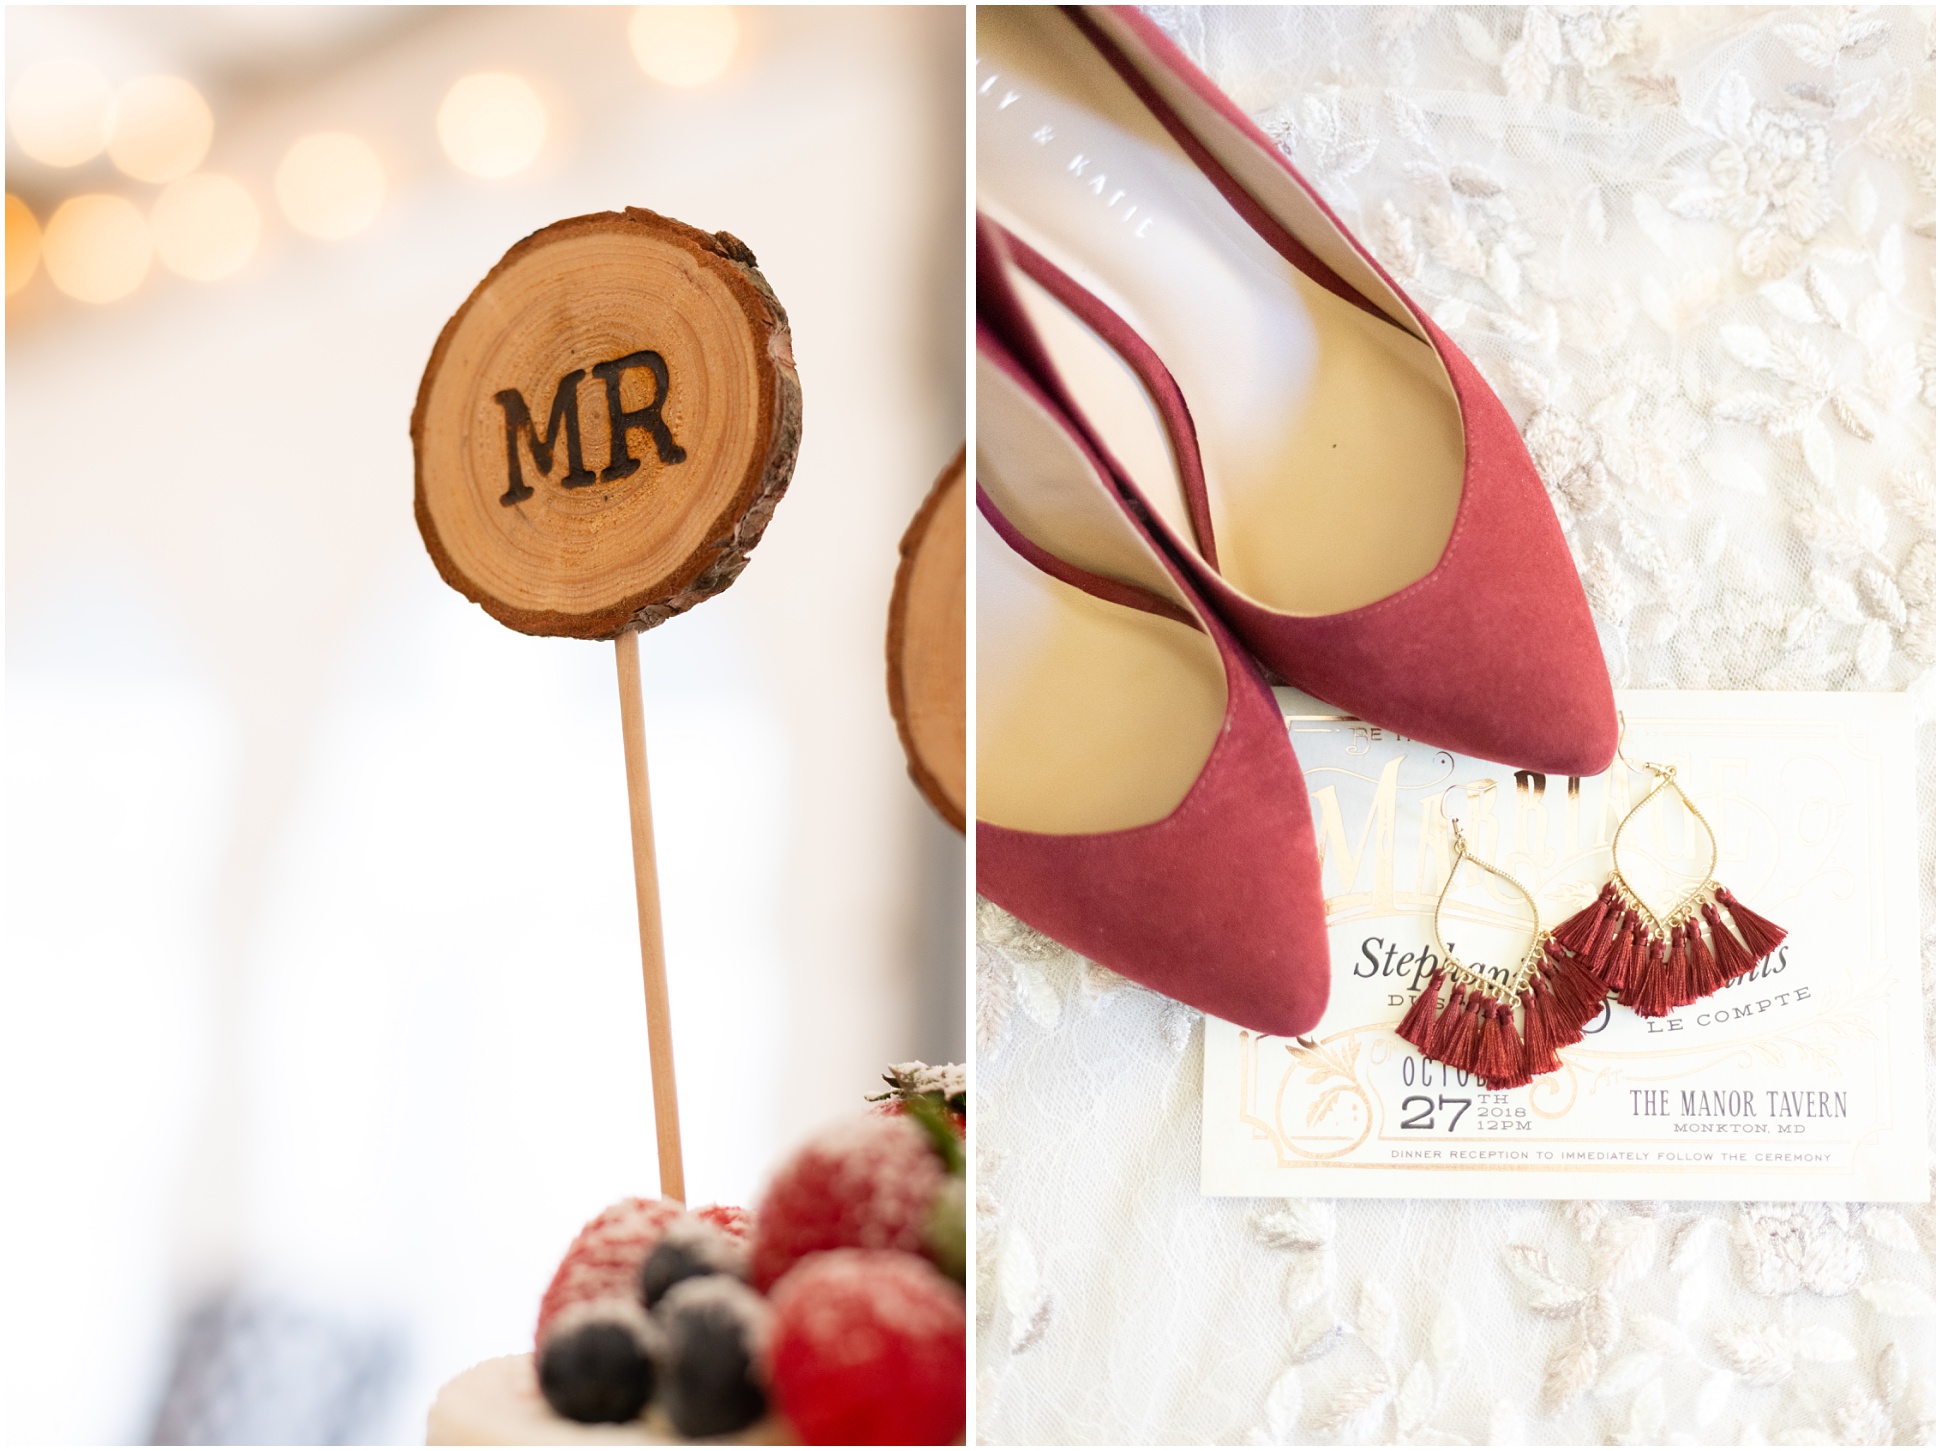 Left: Cake Topper, Right: Bride's Burgundy shoes, earrings, and invitation